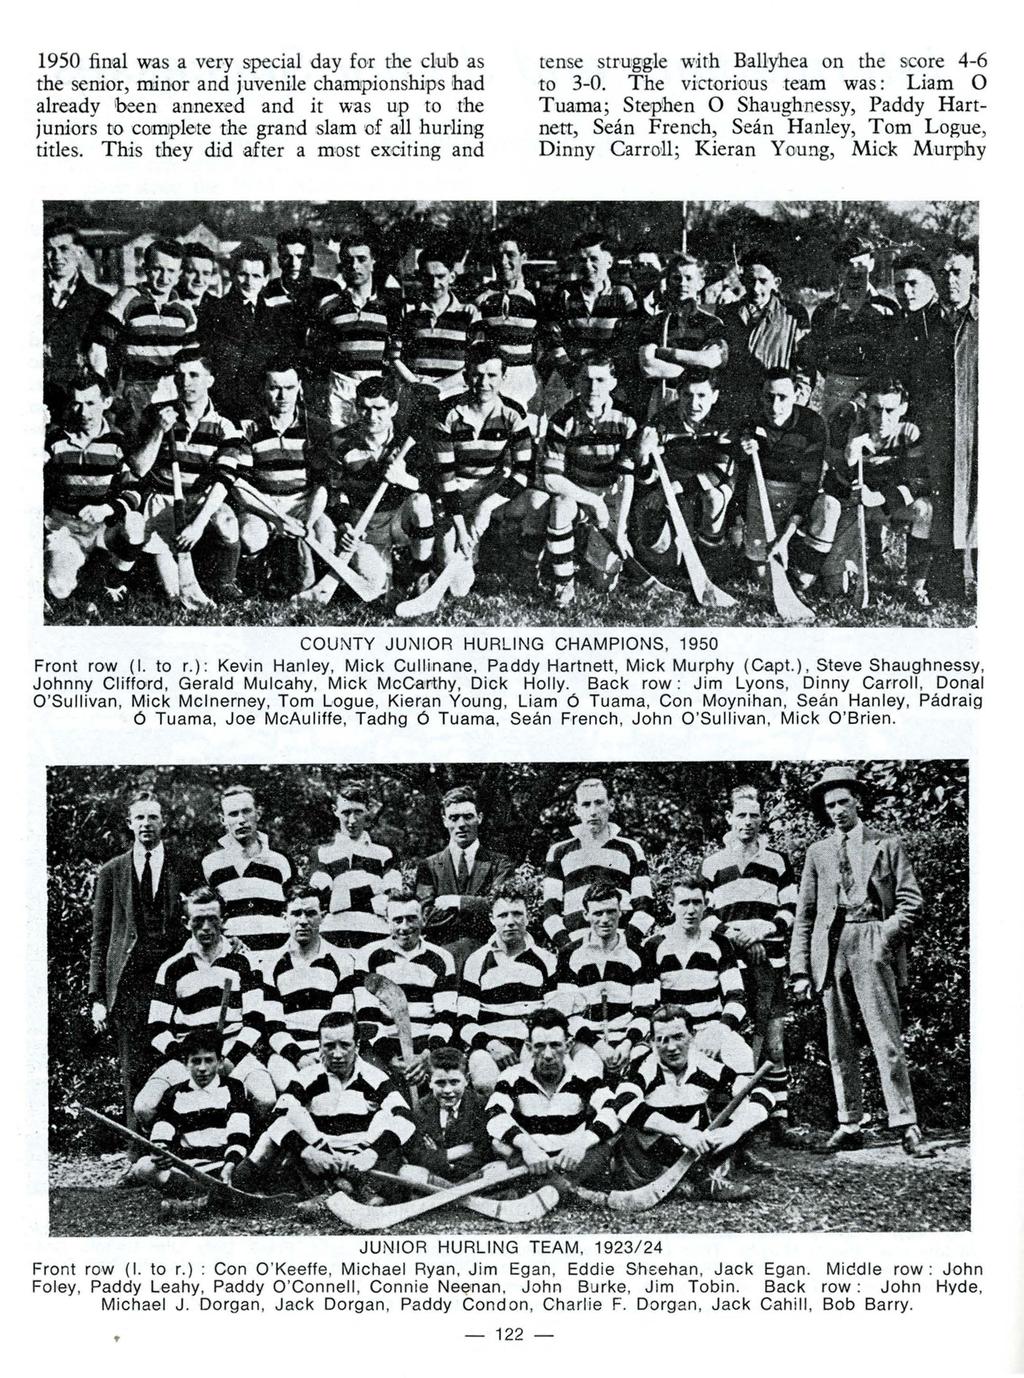 1950 final was a very special day fnr the drub as the senior, minor and juvenile championships had already been annexed and it was up to the juniors to complete the grand slam of au hurling titles.